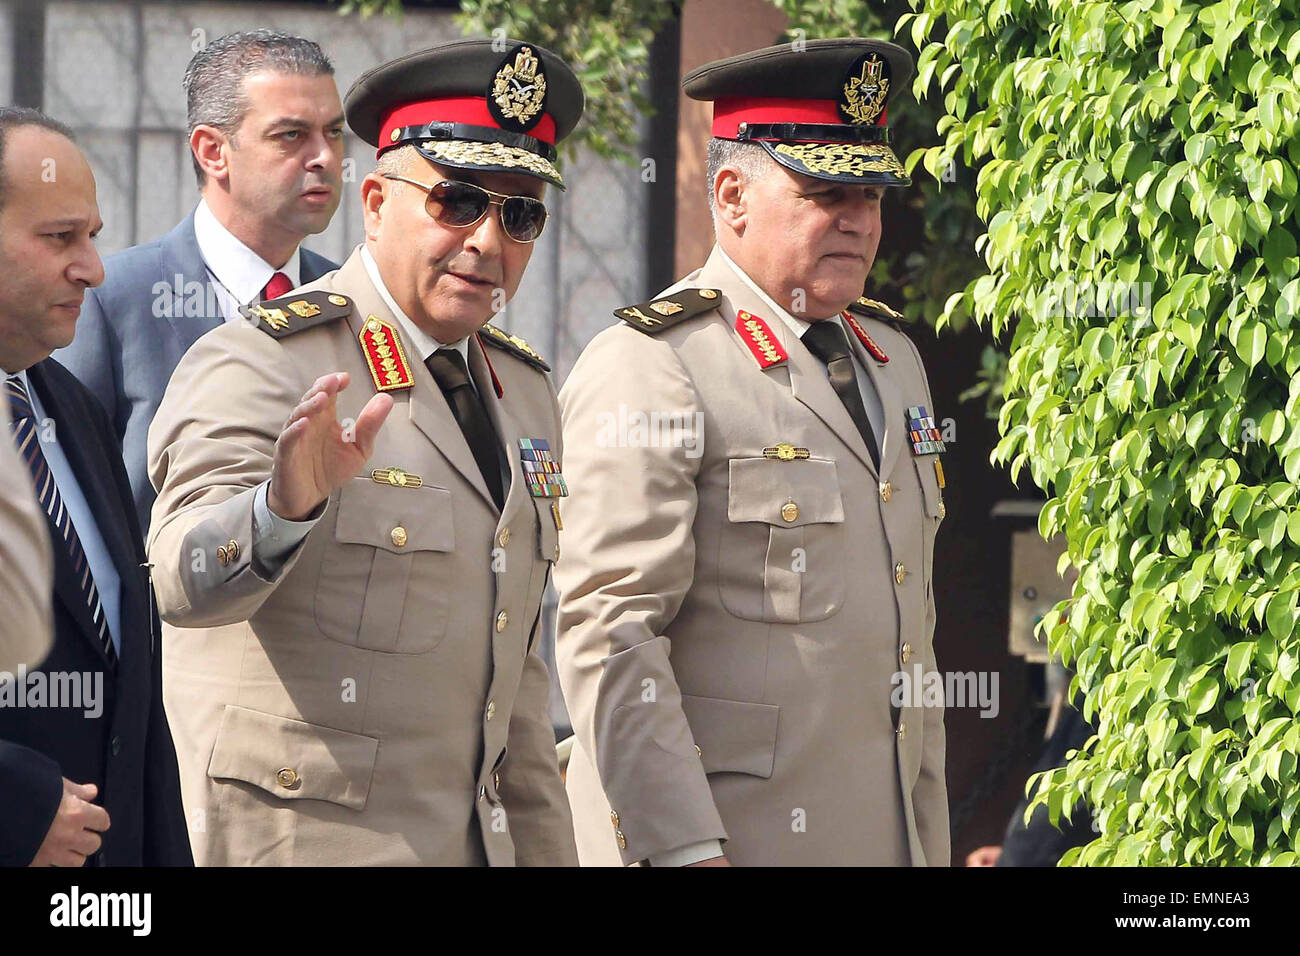 Cairo, Egypt. 22nd Apr, 2015. Chief of Staff of the Egyptian army, Mahmoud Hegazy arrives to the Arab League meeting of the army chiefs from Arab nations in Cairo, capital of Egypt, April 22, 2015. Arab military chiefs of staff discussed on Wednesday the formation of a joint Arab military force to combat terrorism and protect Arab national security. © Ahmed Gomaa/Xinhua/Alamy Live News Stock Photo